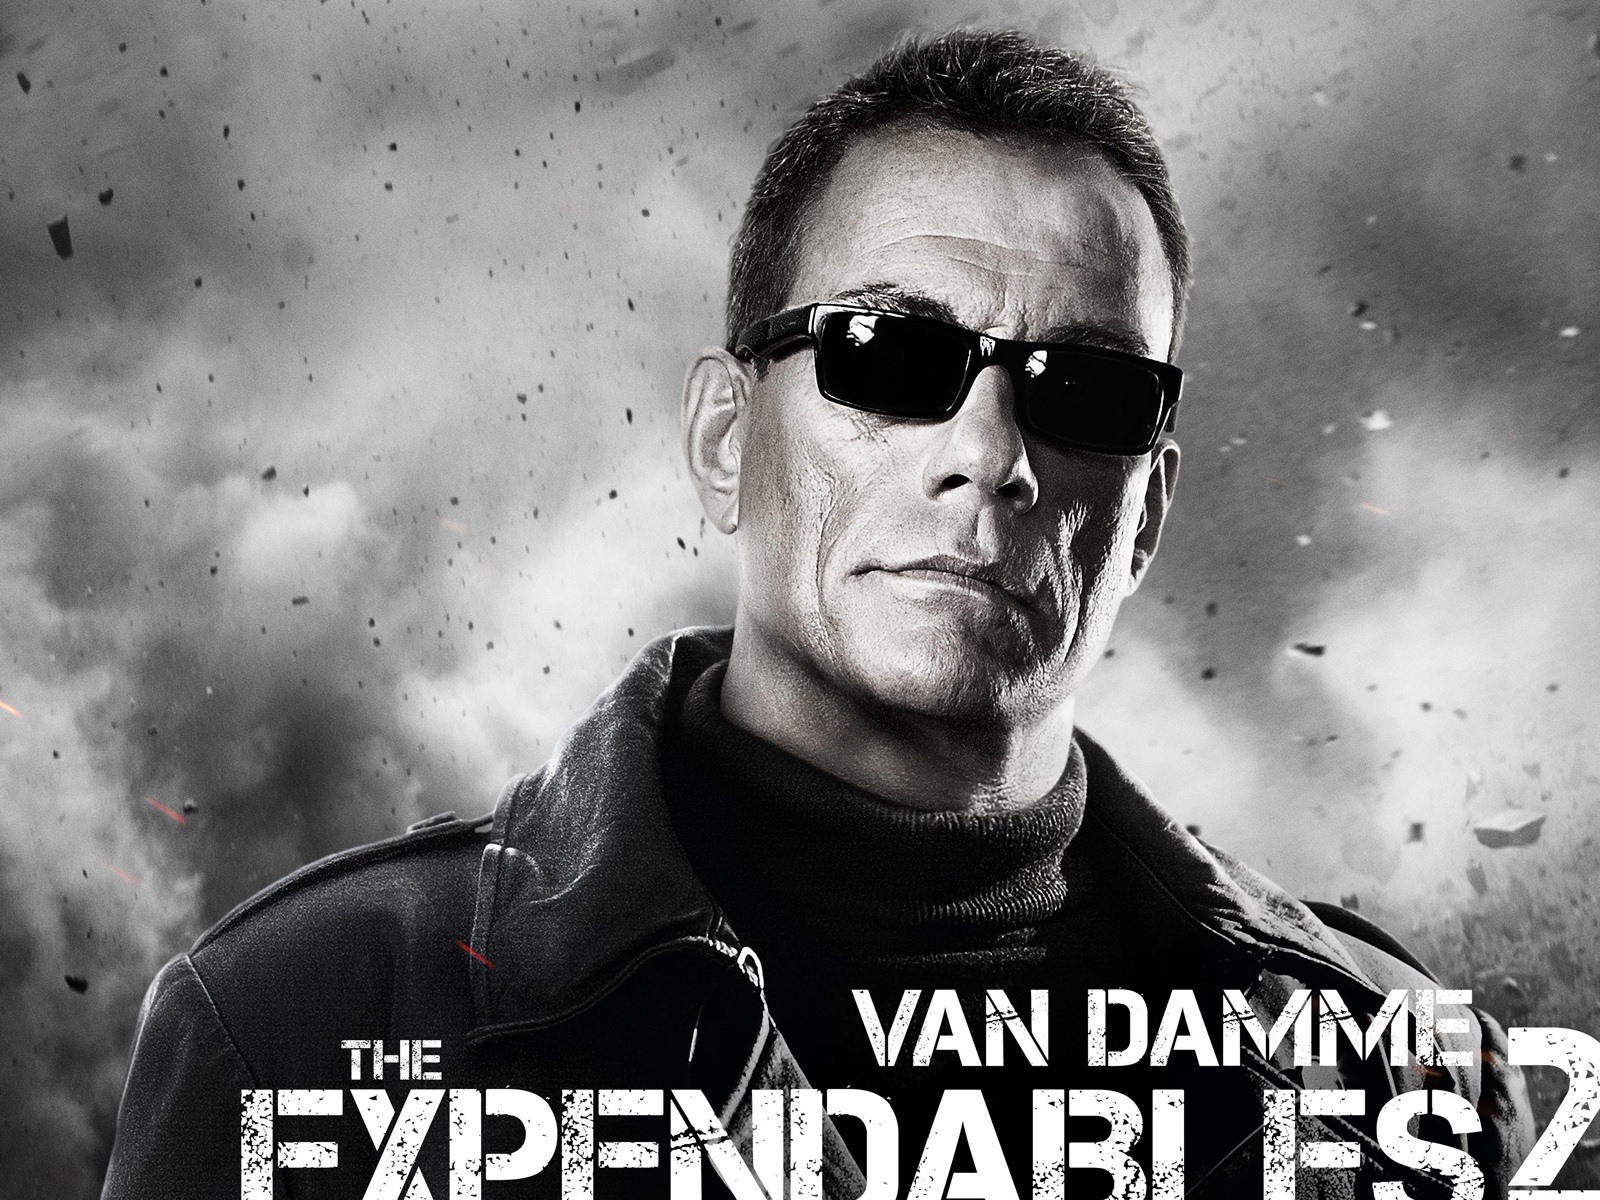 2012 The Expendables 2 敢死队2 高清壁纸6 - 1600x1200